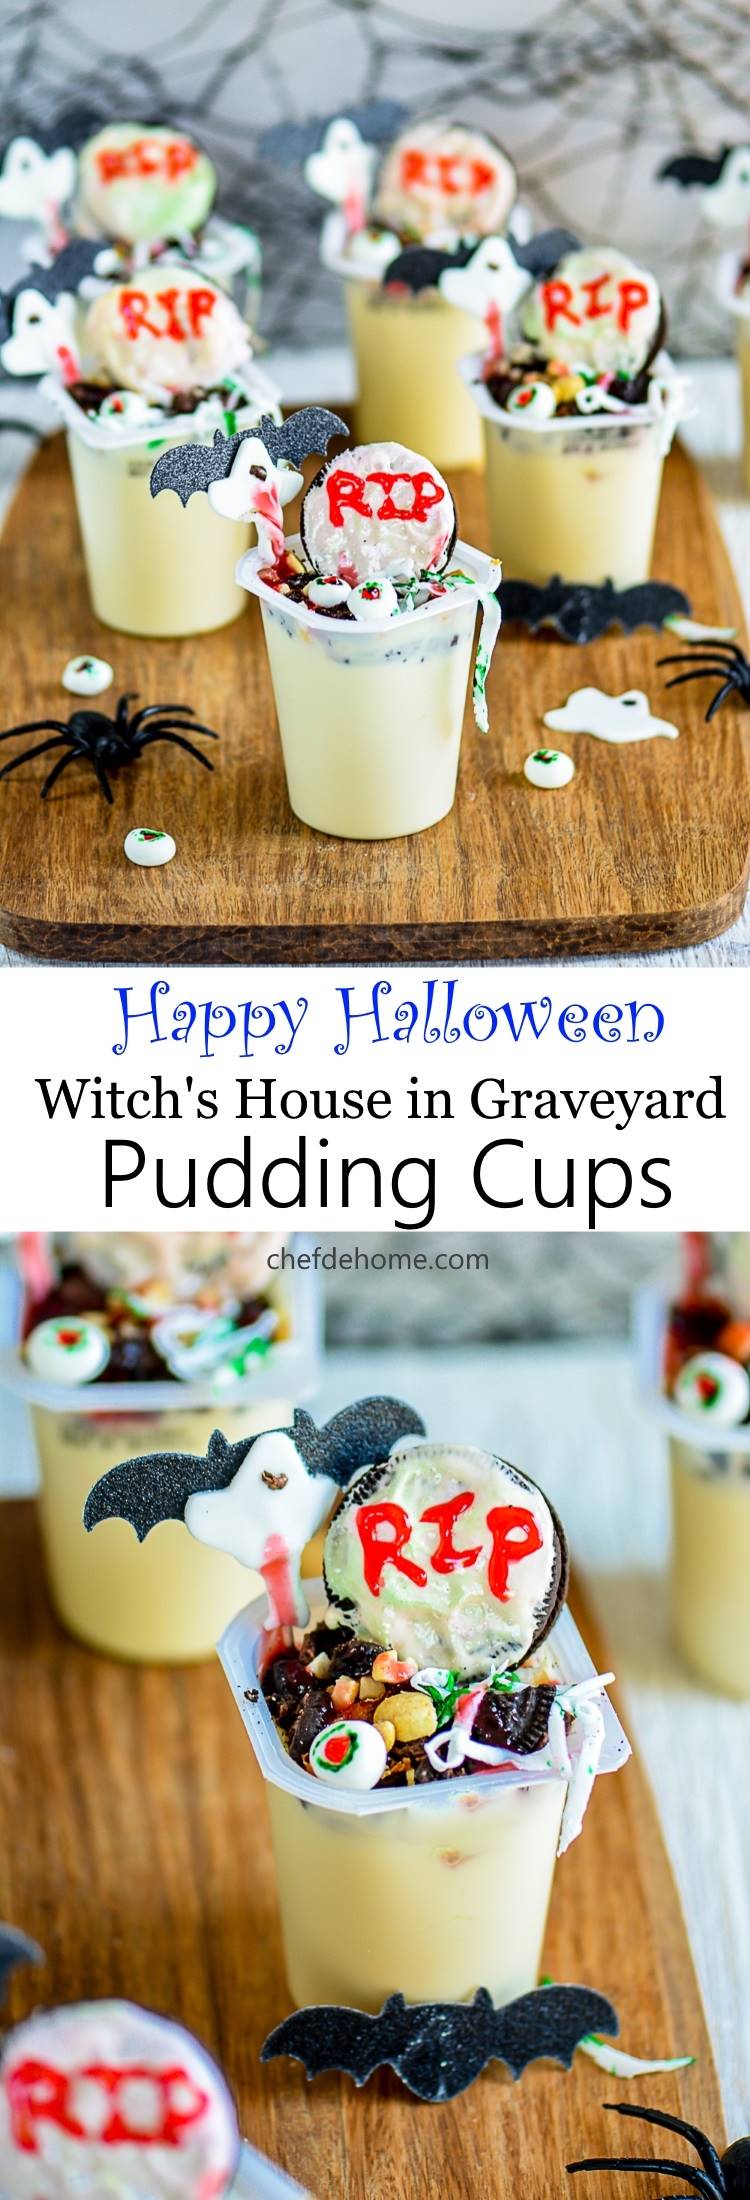 Halloween Fun Snack for Kids with Snack Pack Pudding Cups Witch Graveyards Very easy to assemble | chefdehome.com